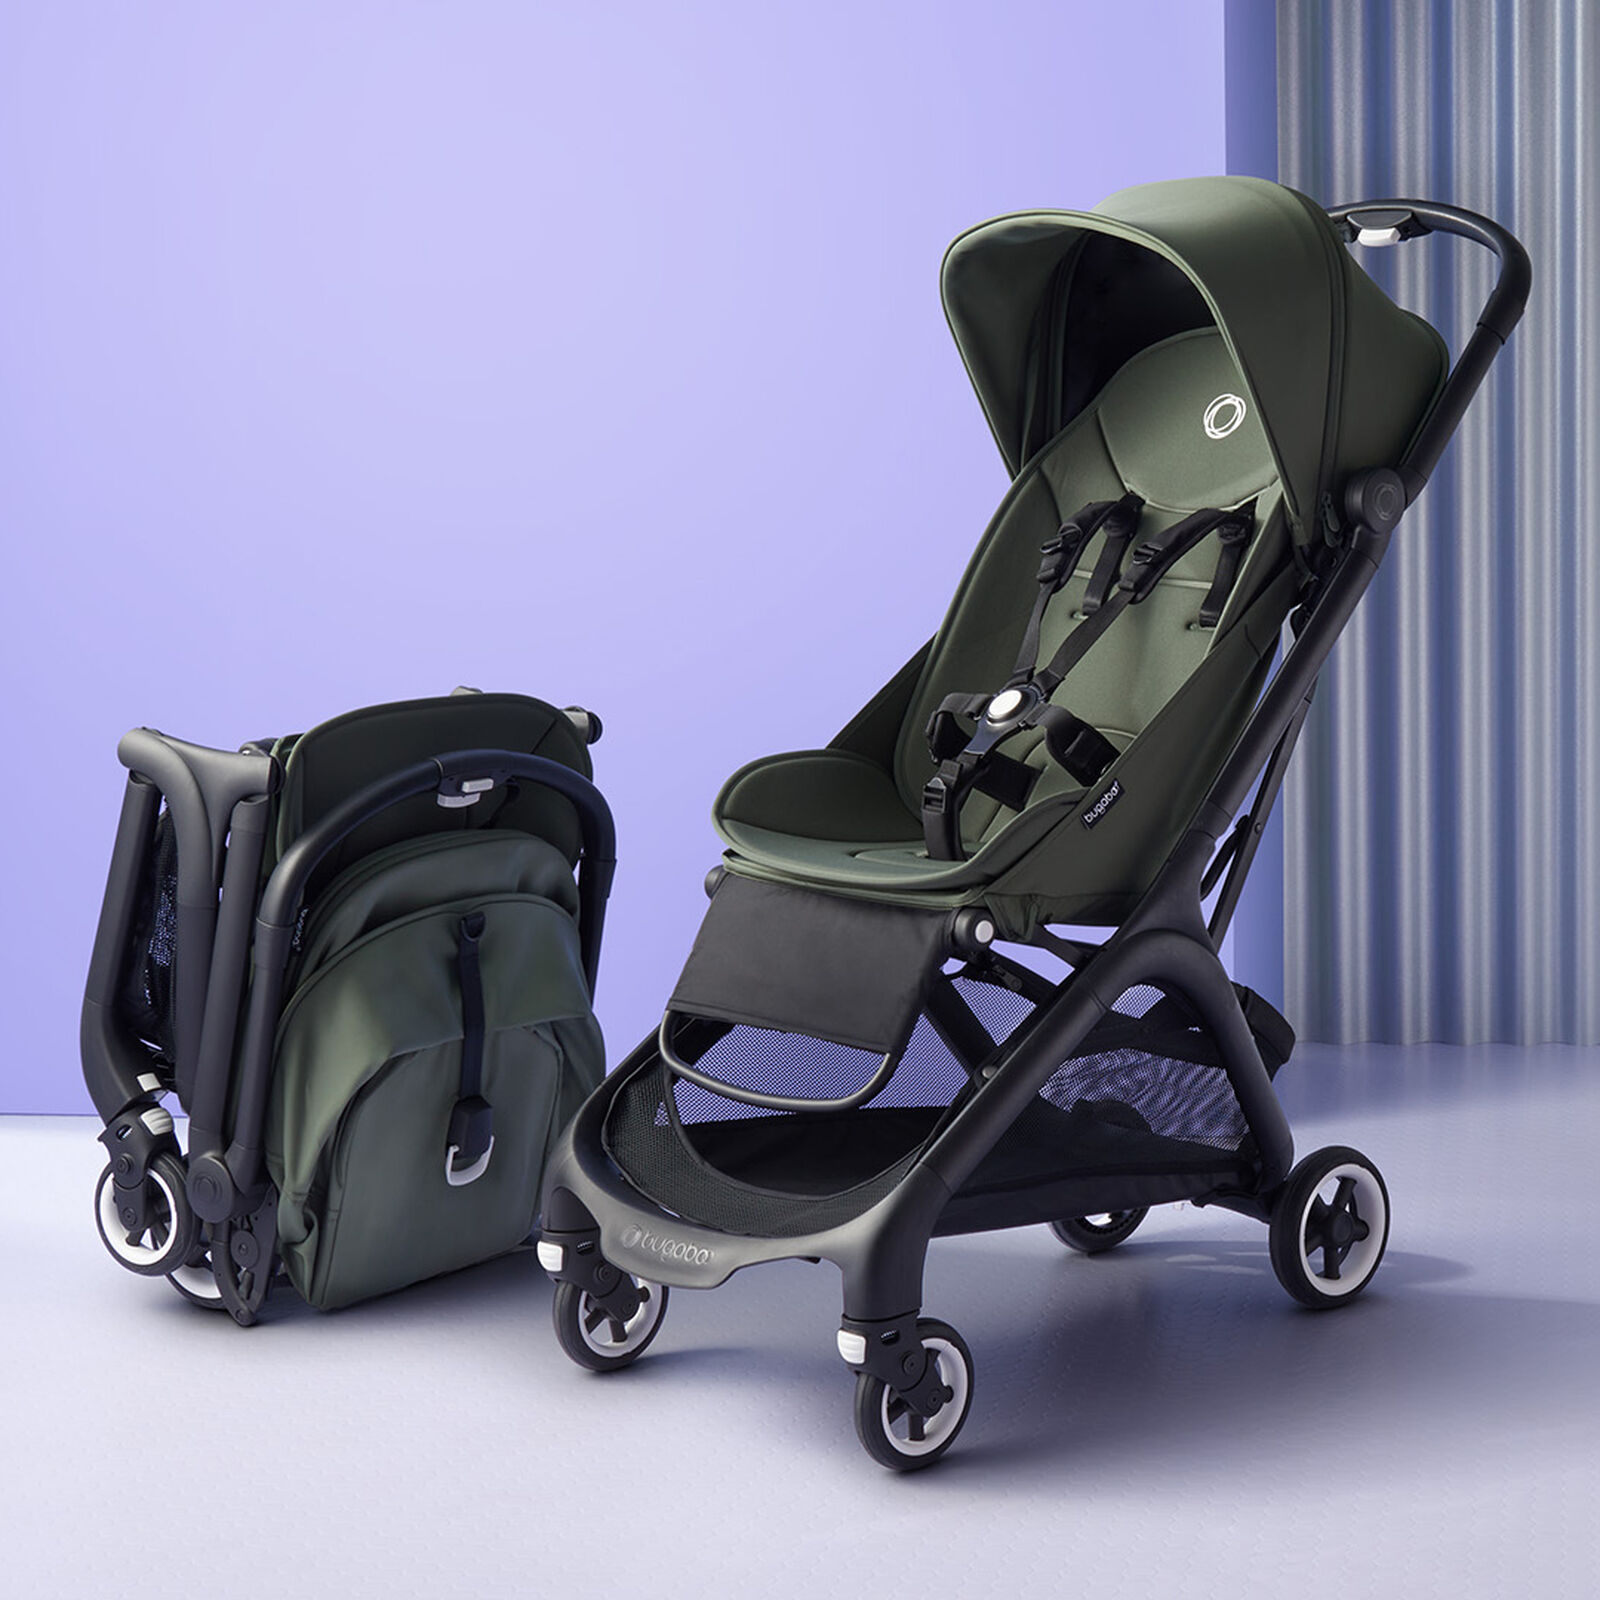 Bugaboo Butterfly seat pram - View 3